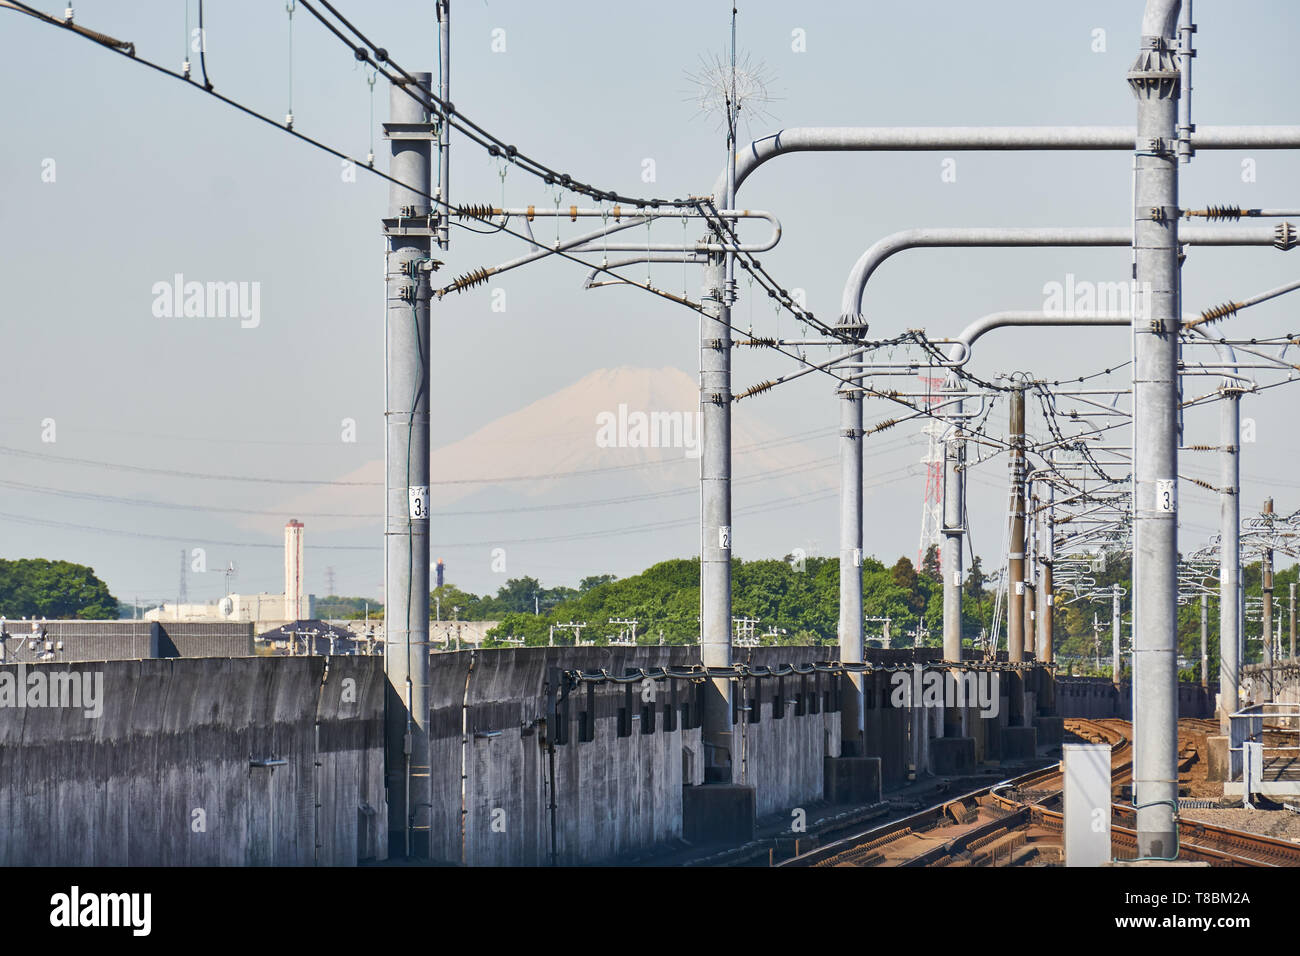 Mount Fuji is faintly visible in the distance over the train tracks of the Tsukuba Express Line at Moriya Station on a sunny morning. Stock Photo